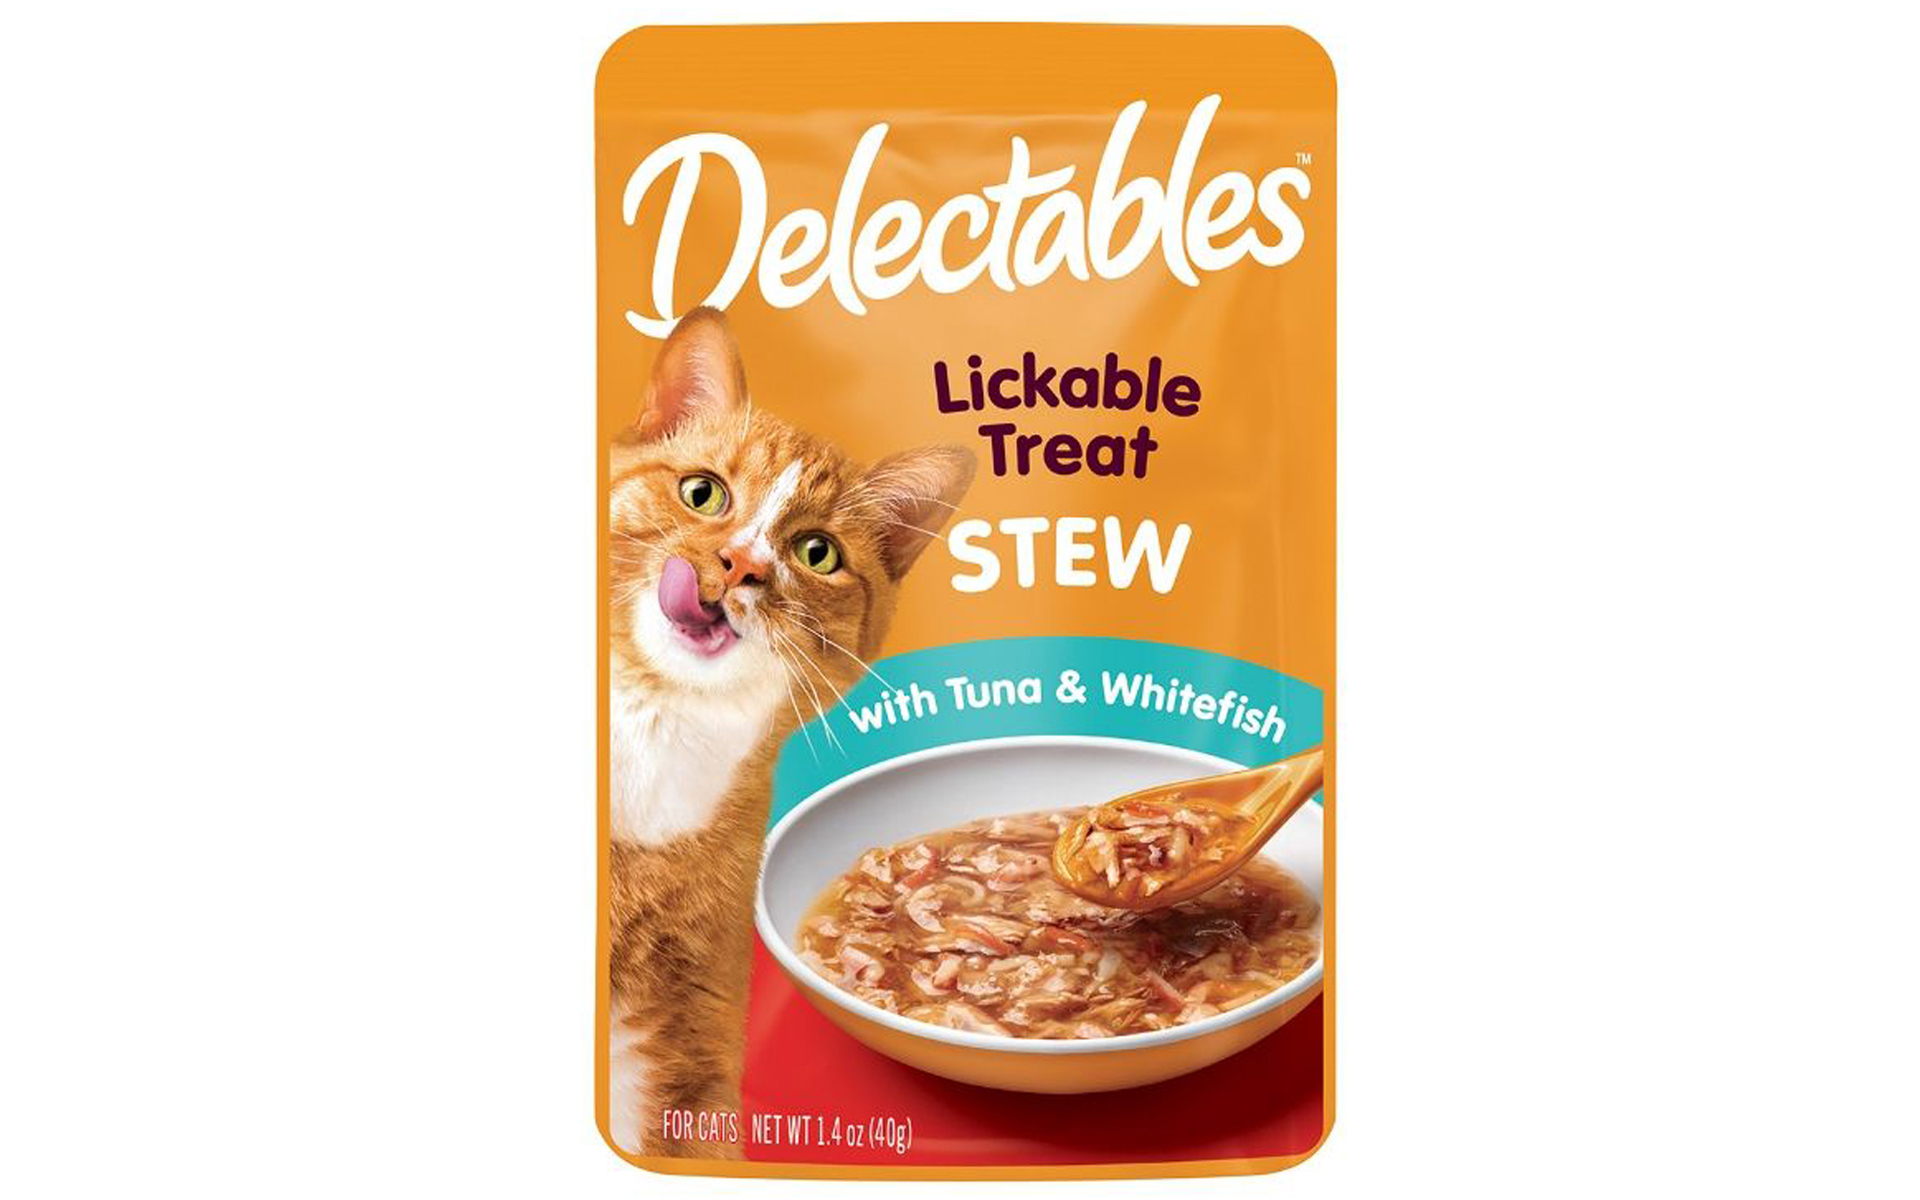 Delectables Stew Lickable Cat Treats - Tuna & Whitefish